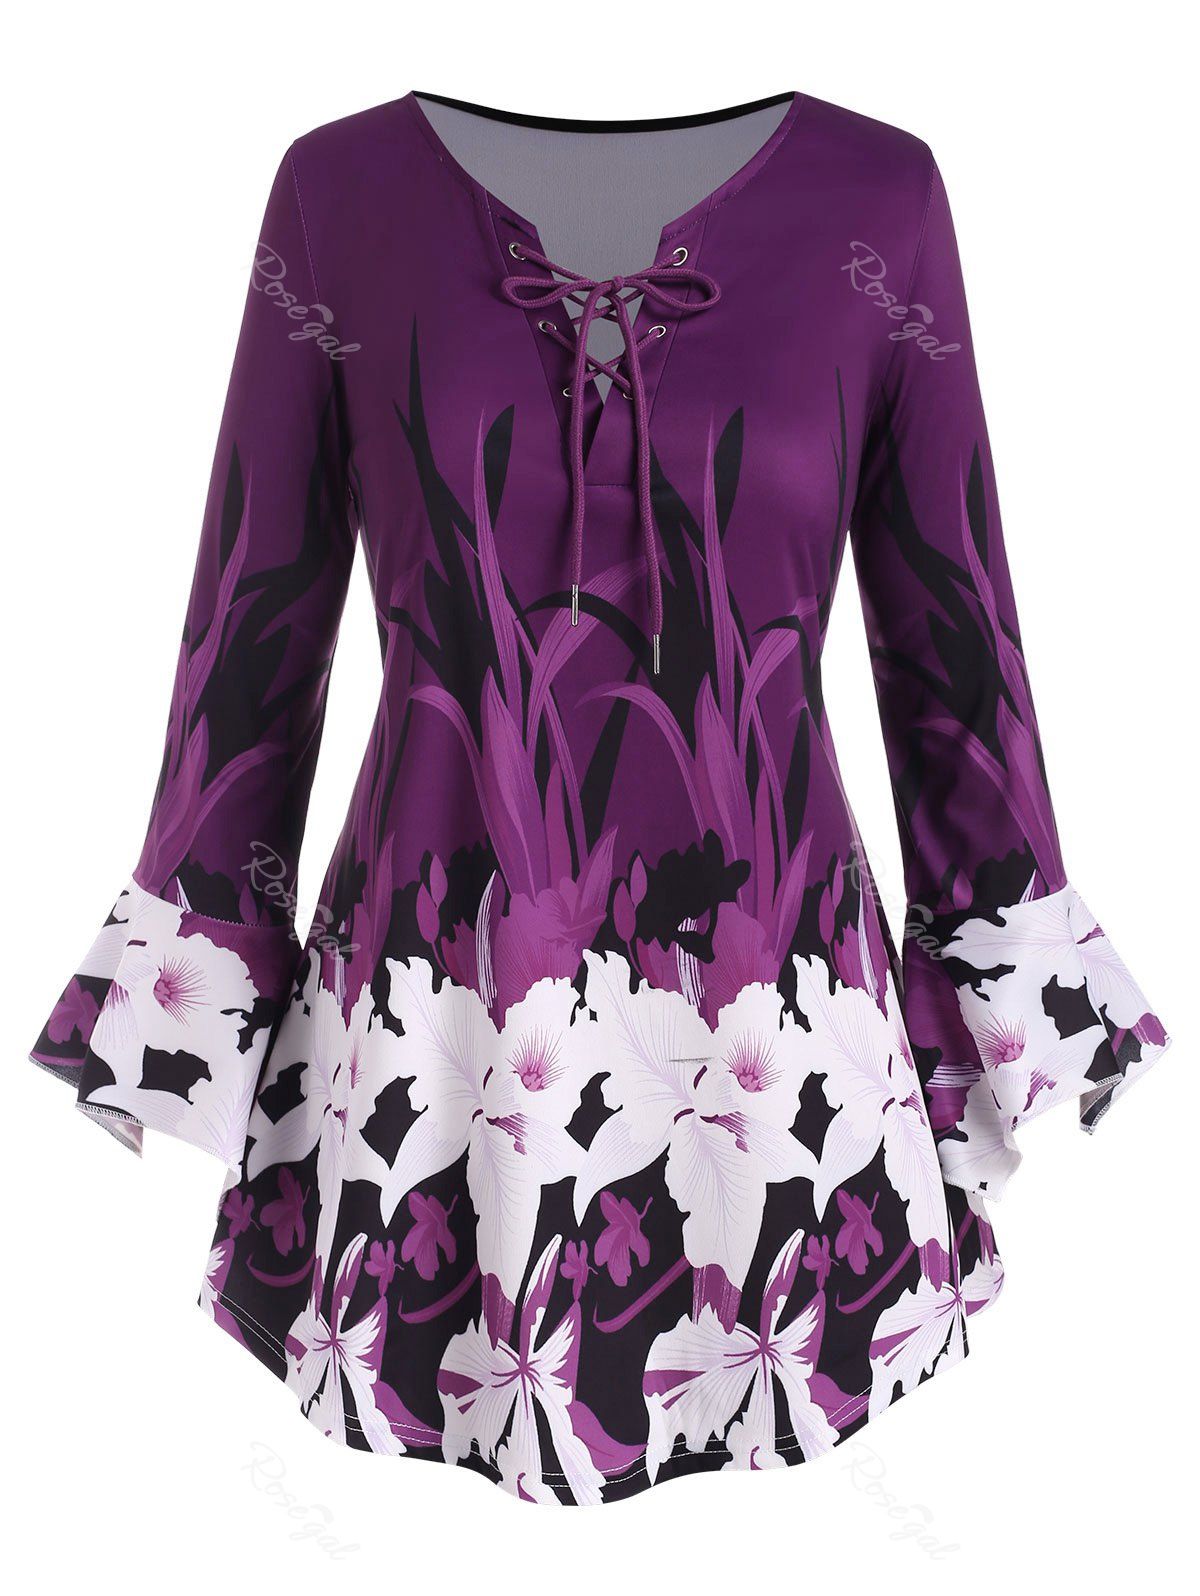 Fashion Plus Size Floral Print Bell Sleeve Lace Up Top  